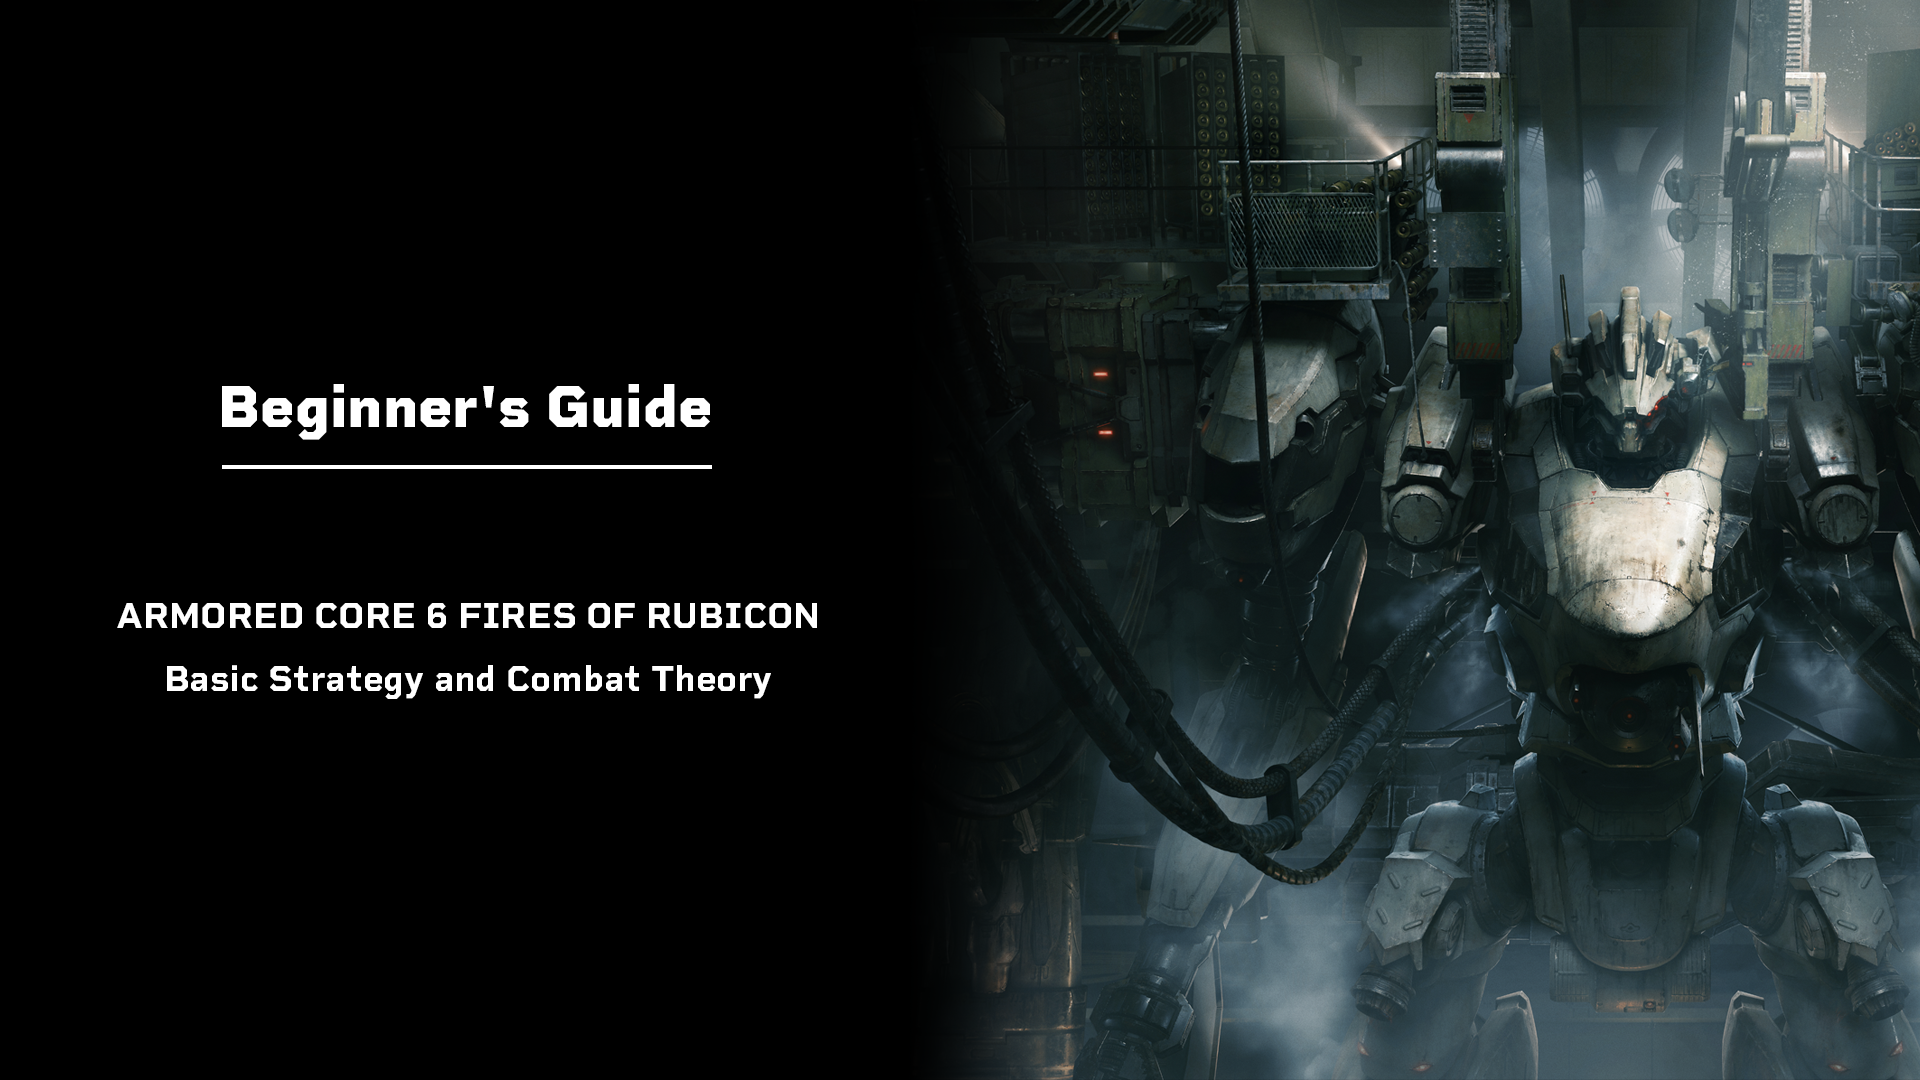 Armored Core 6 beginners guide - 8 things to know before starting - Polygon